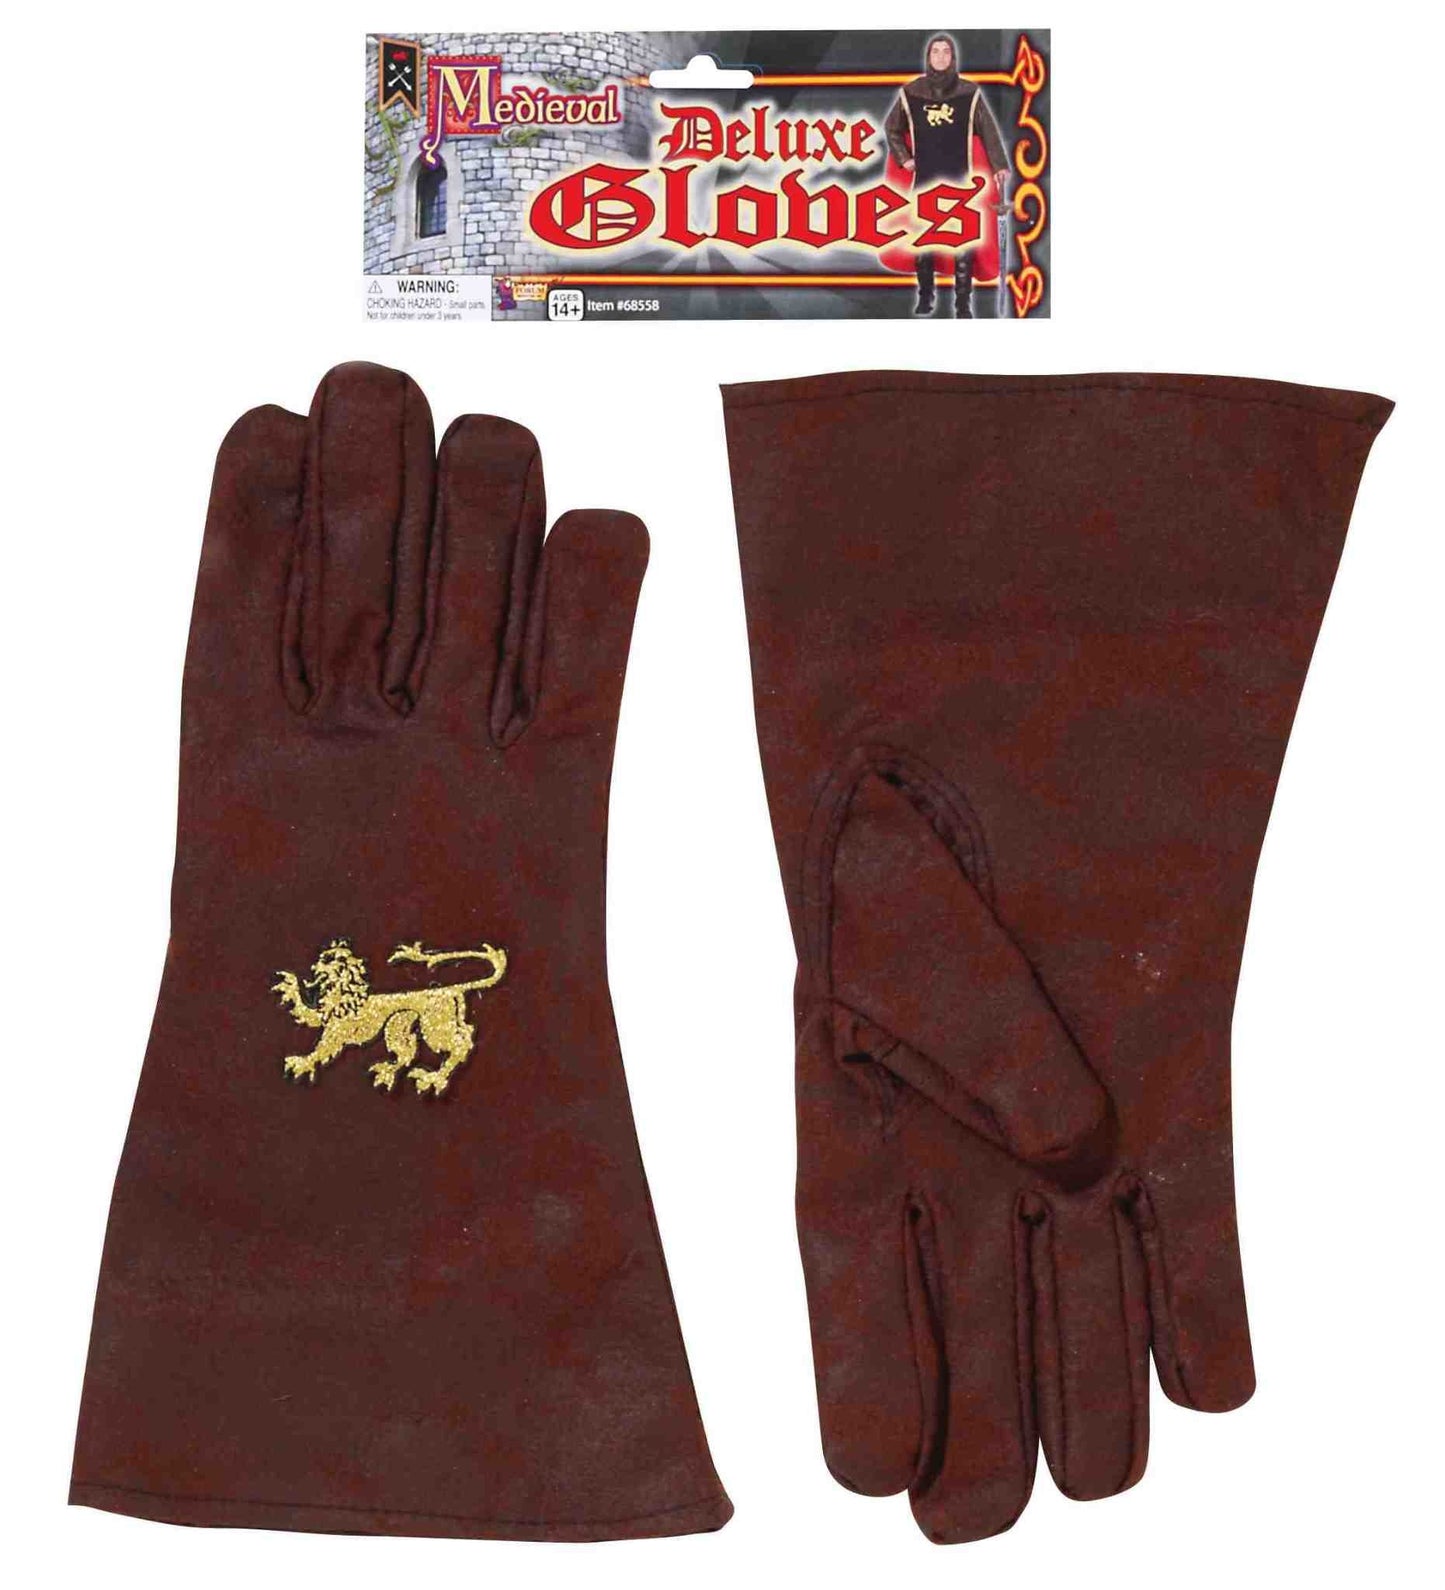 Deluxe Medieval Gloves: Brown